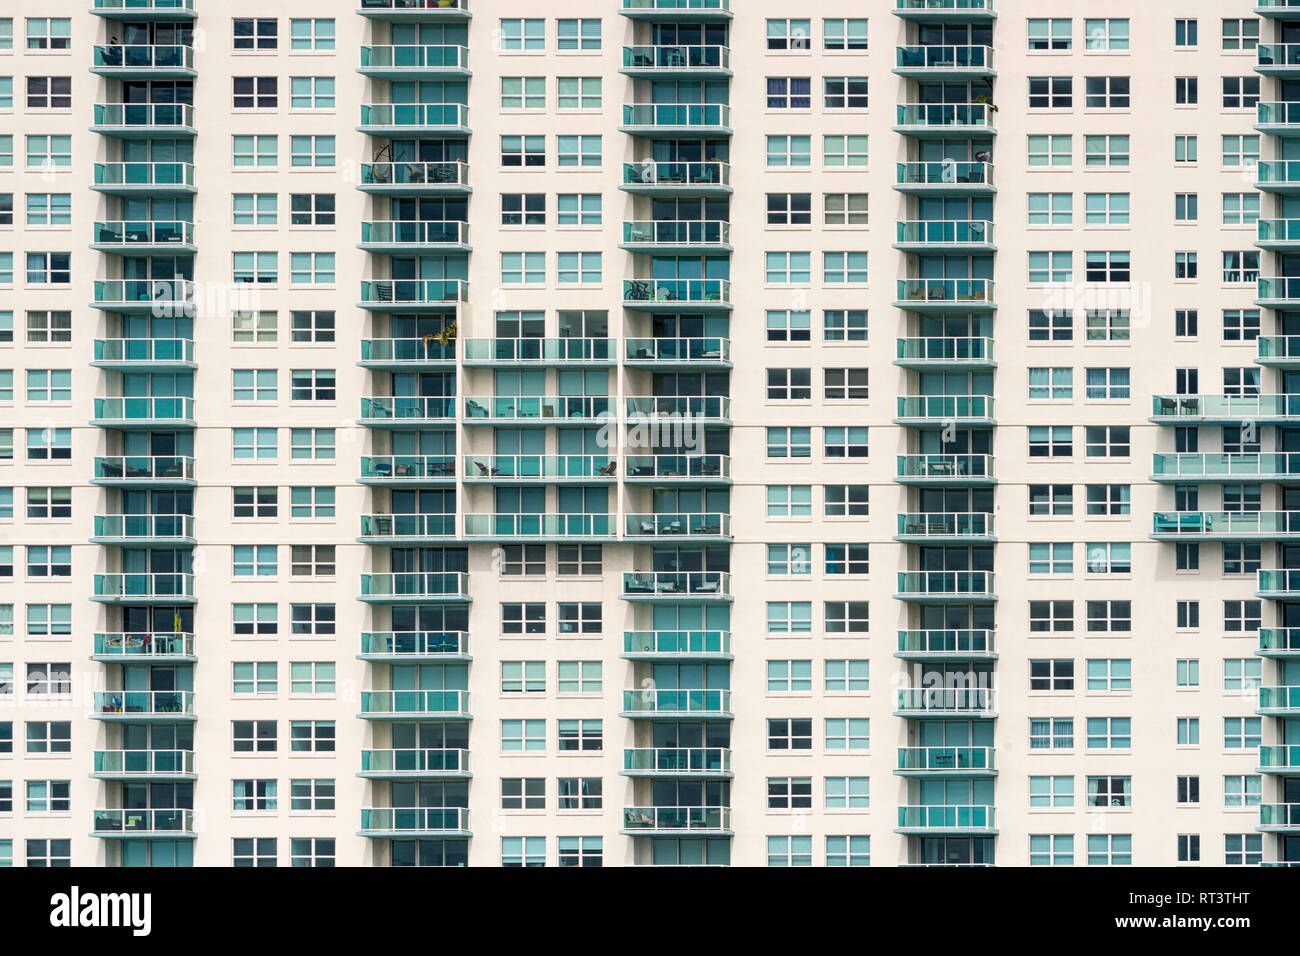 United States of America, Florida, Miami, Venetian Islands, front of a skyscraper with balconies and windows Stock Photo